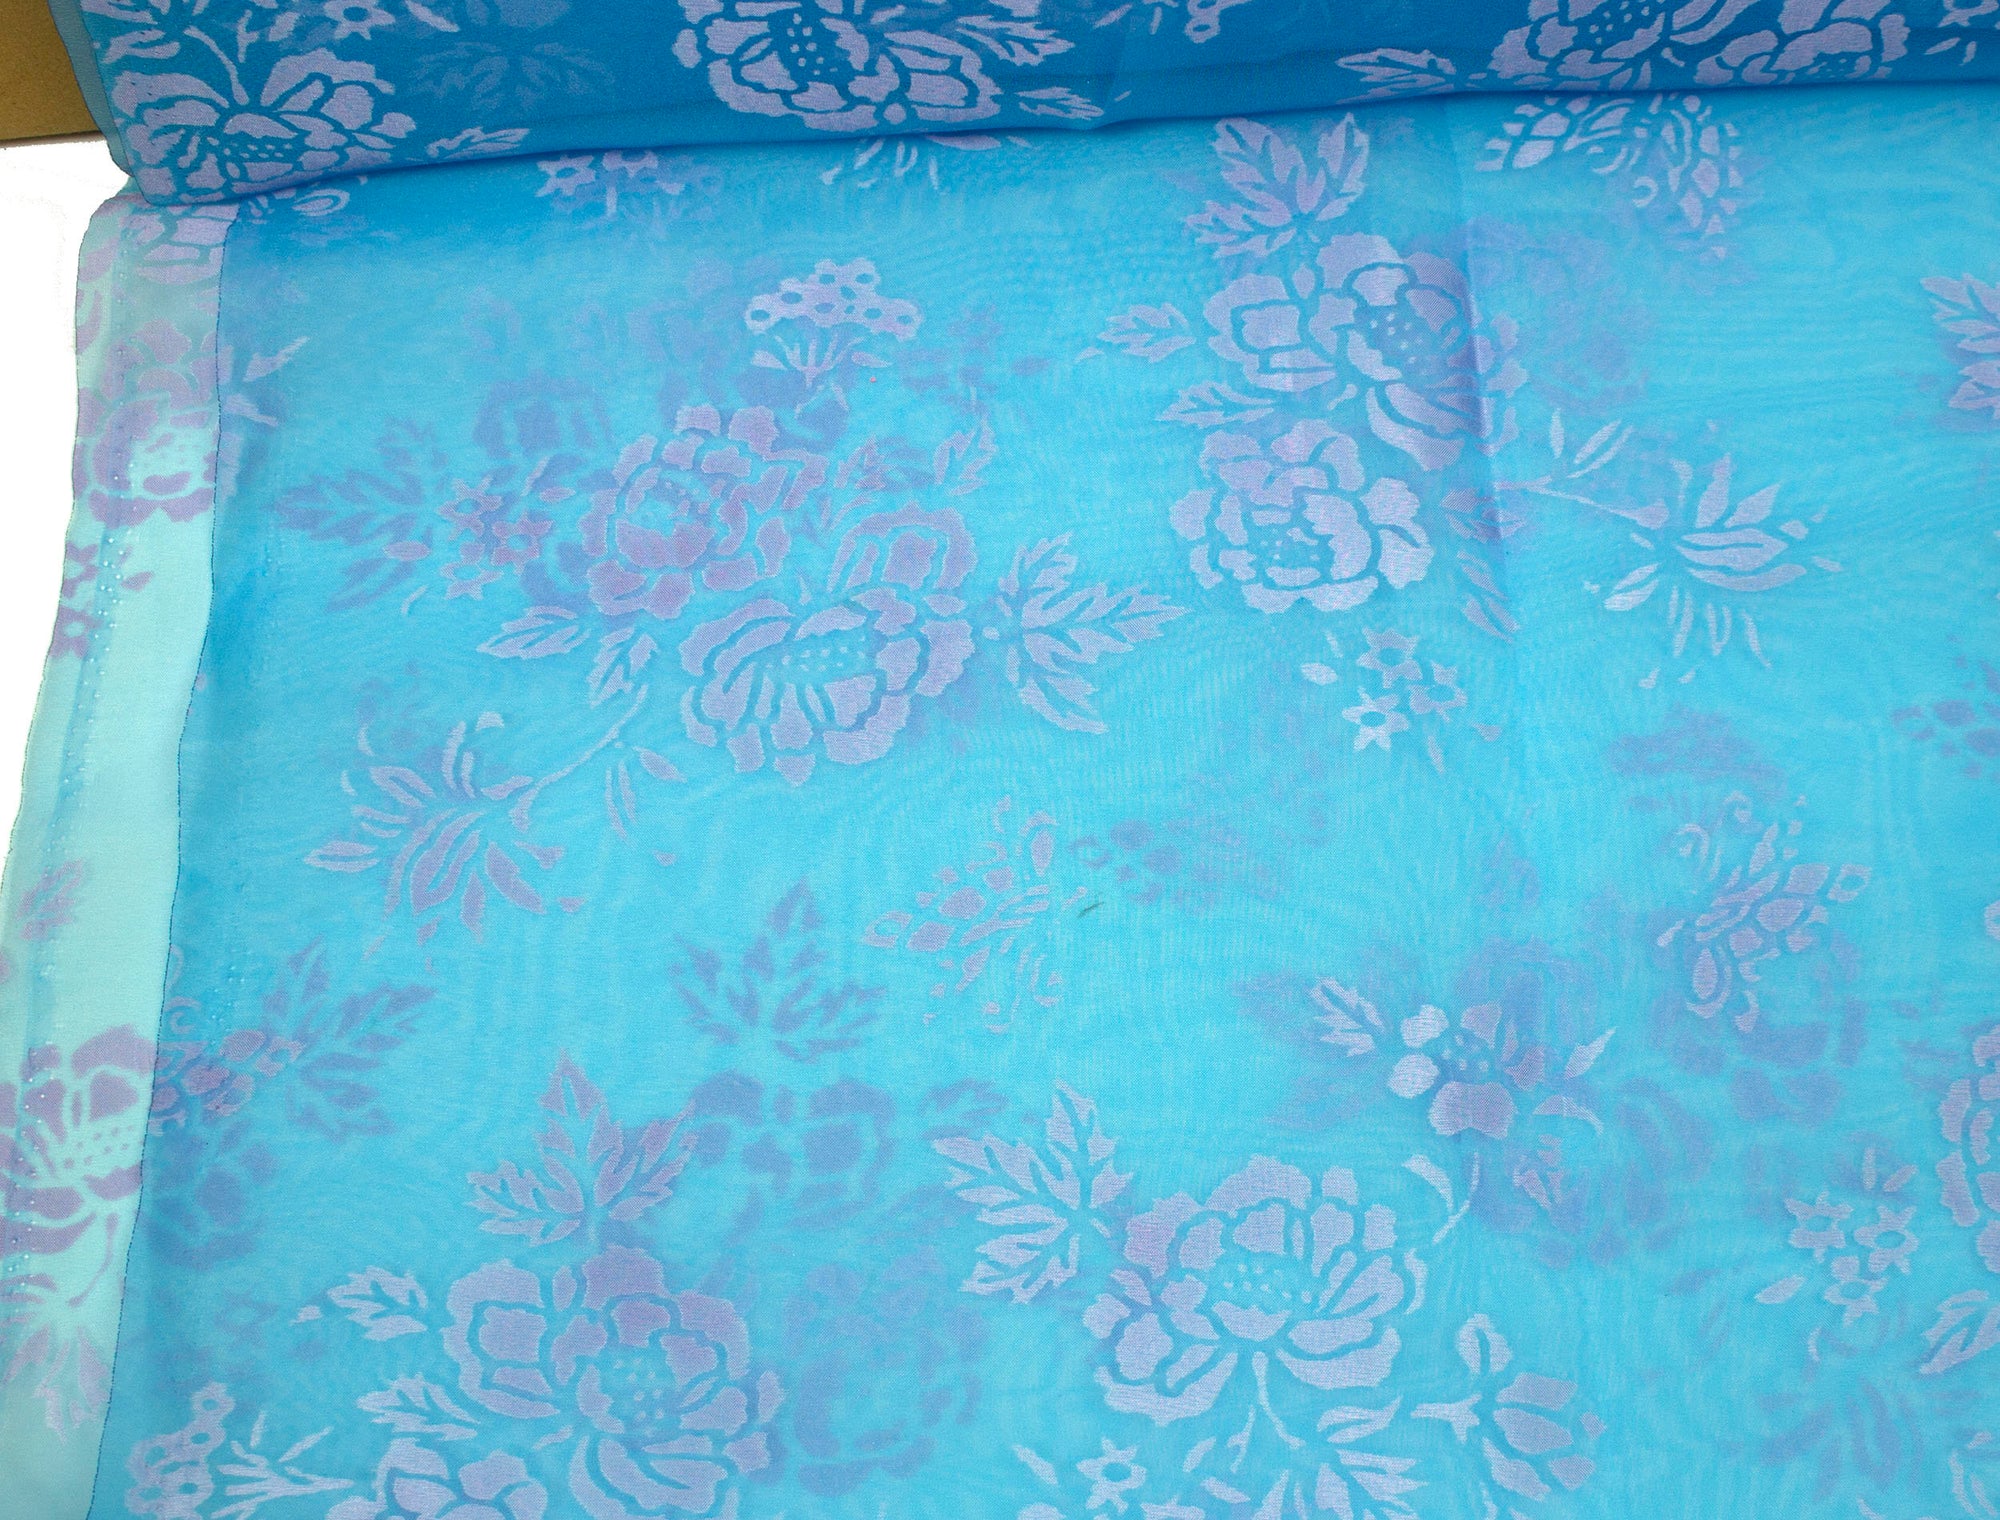 Vintage Fabric Sheer Aqua Blue with Lavender Floral Print 45" Wide - Sold by the Yard